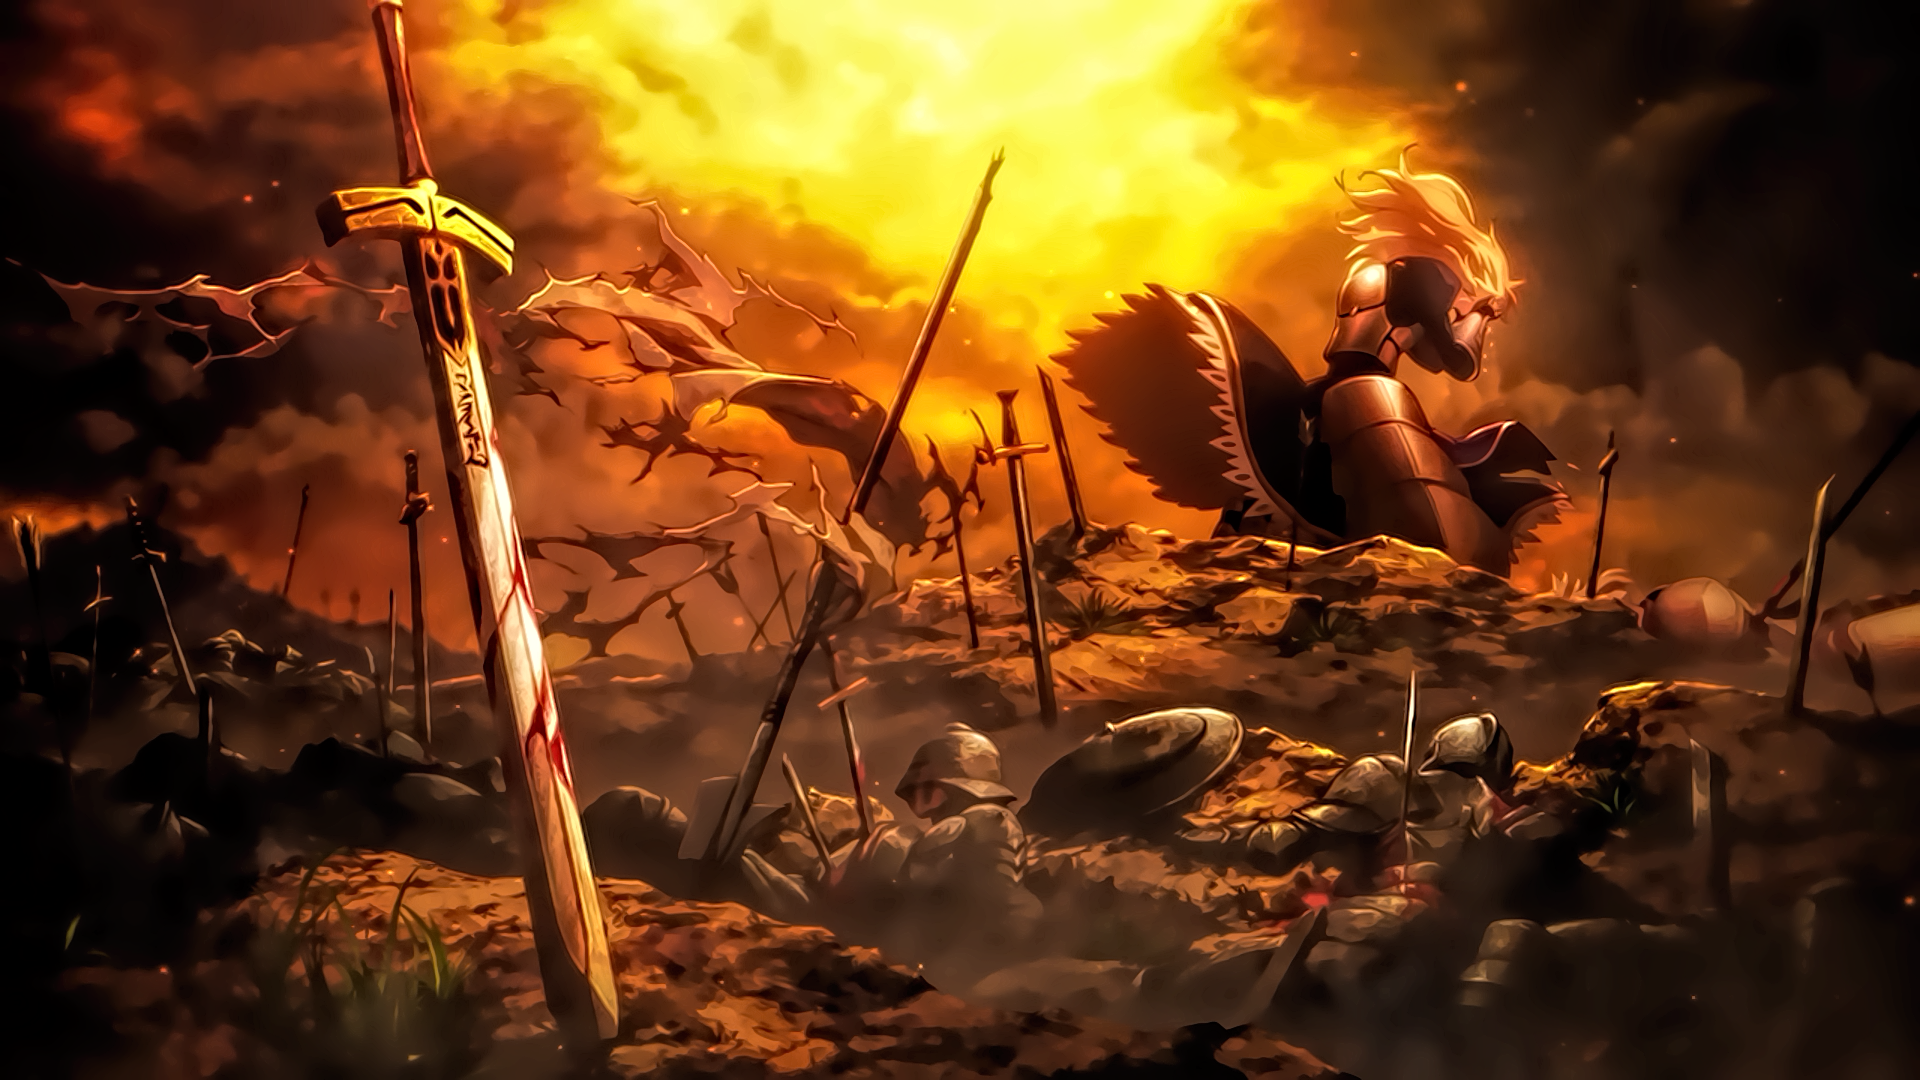 Fate/Stay Night: Unlimited Blade Works HD Wallpaper by Sanoboss